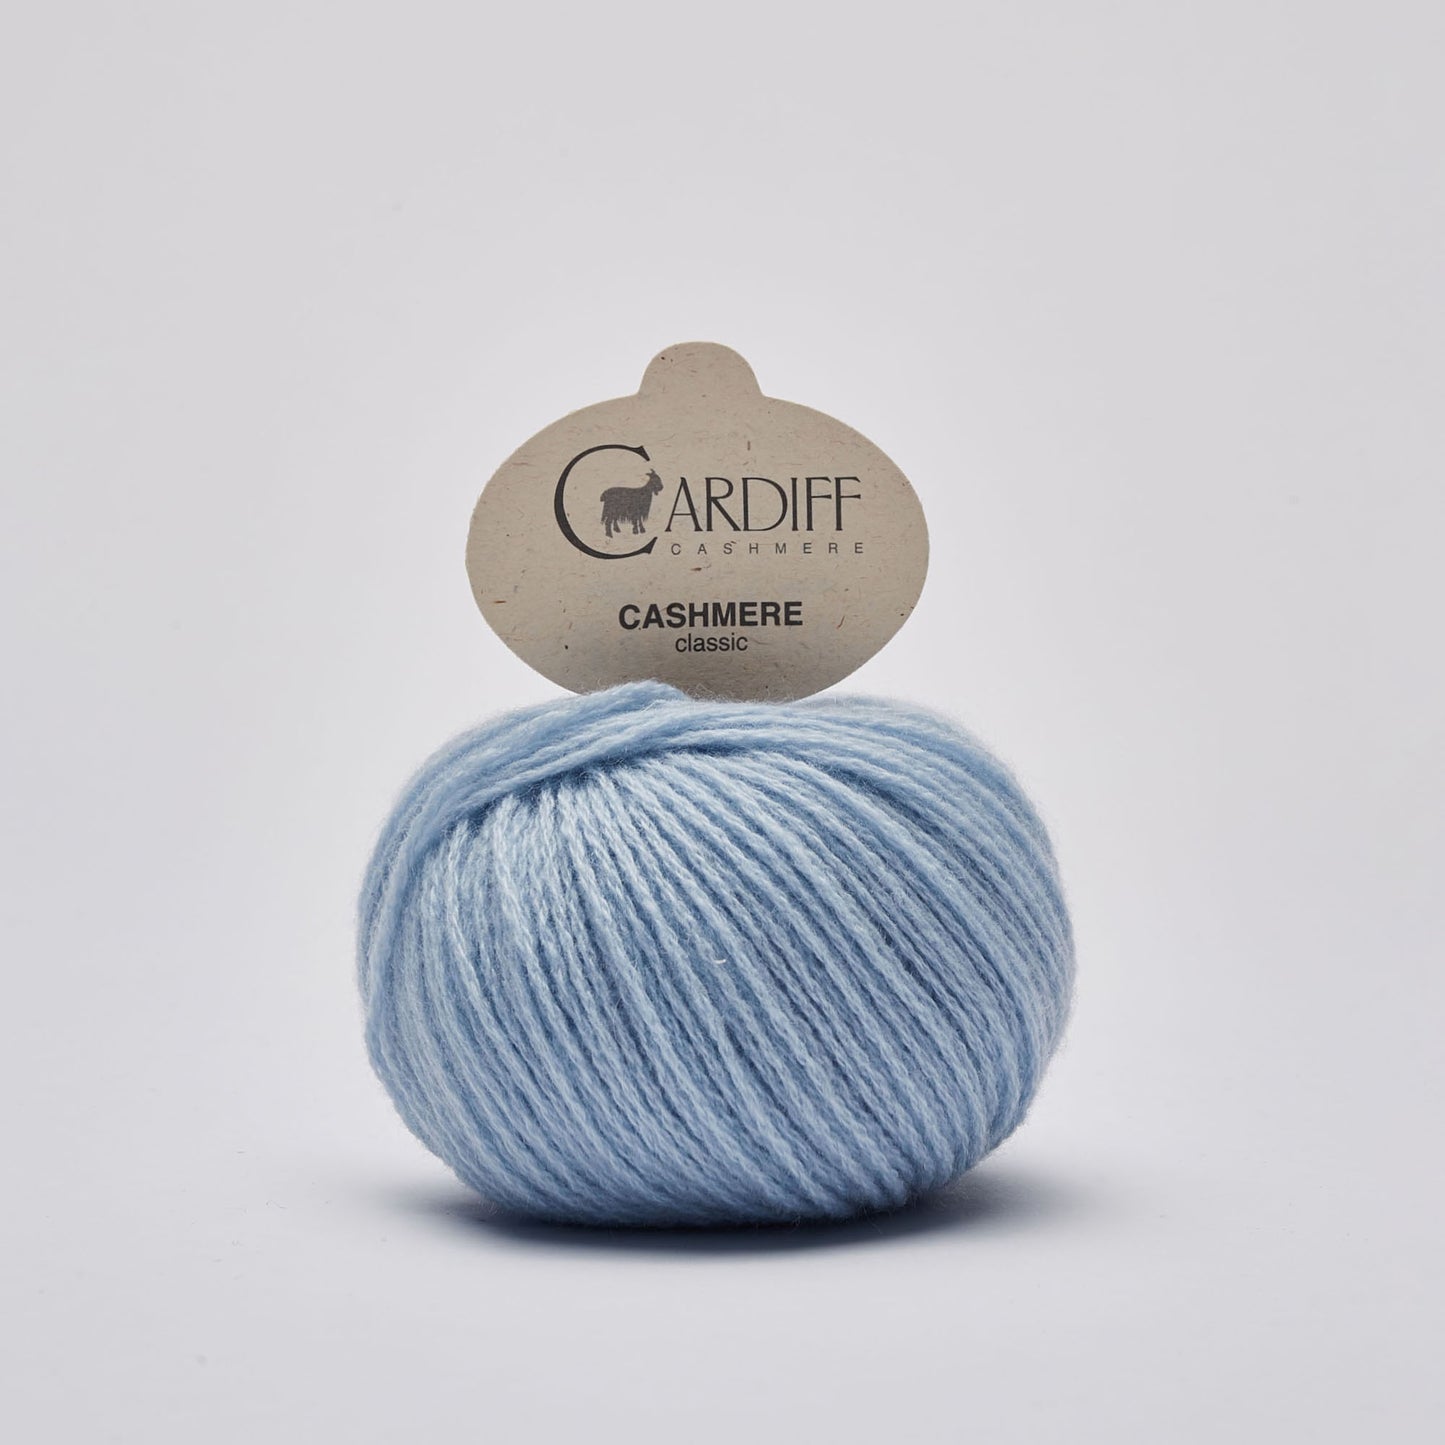 Cardiff CLASSIC gentle yarn, 644, BABY, comp: 100% Cashmere